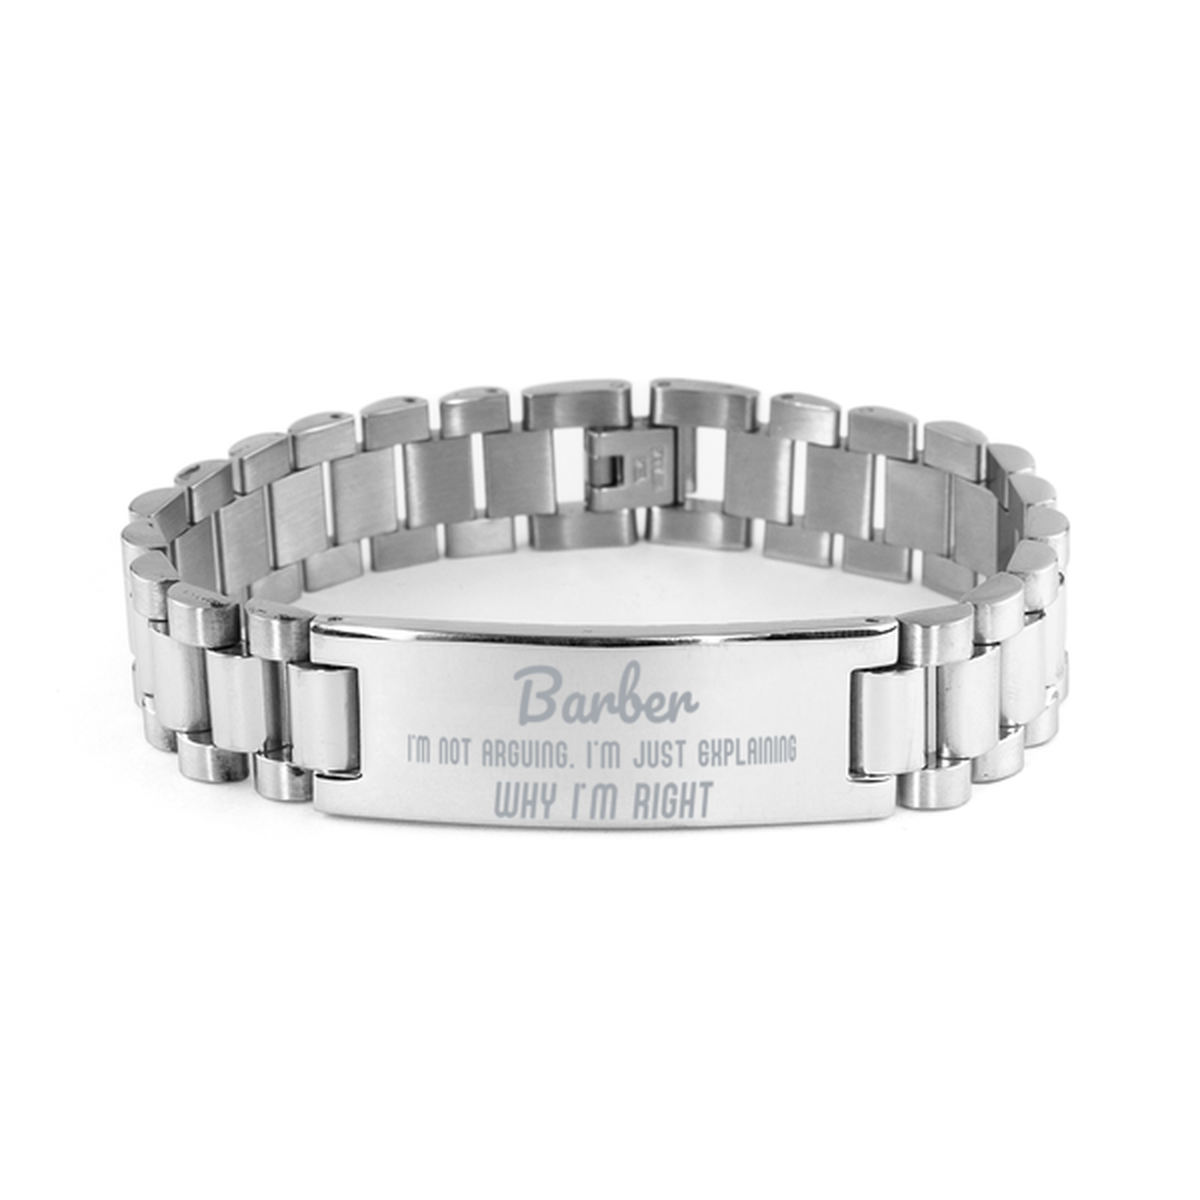 Barber I'm not Arguing. I'm Just Explaining Why I'm RIGHT Ladder Stainless Steel Bracelet, Graduation Birthday Christmas Barber Gifts For Barber Funny Saying Quote Present for Men Women Coworker